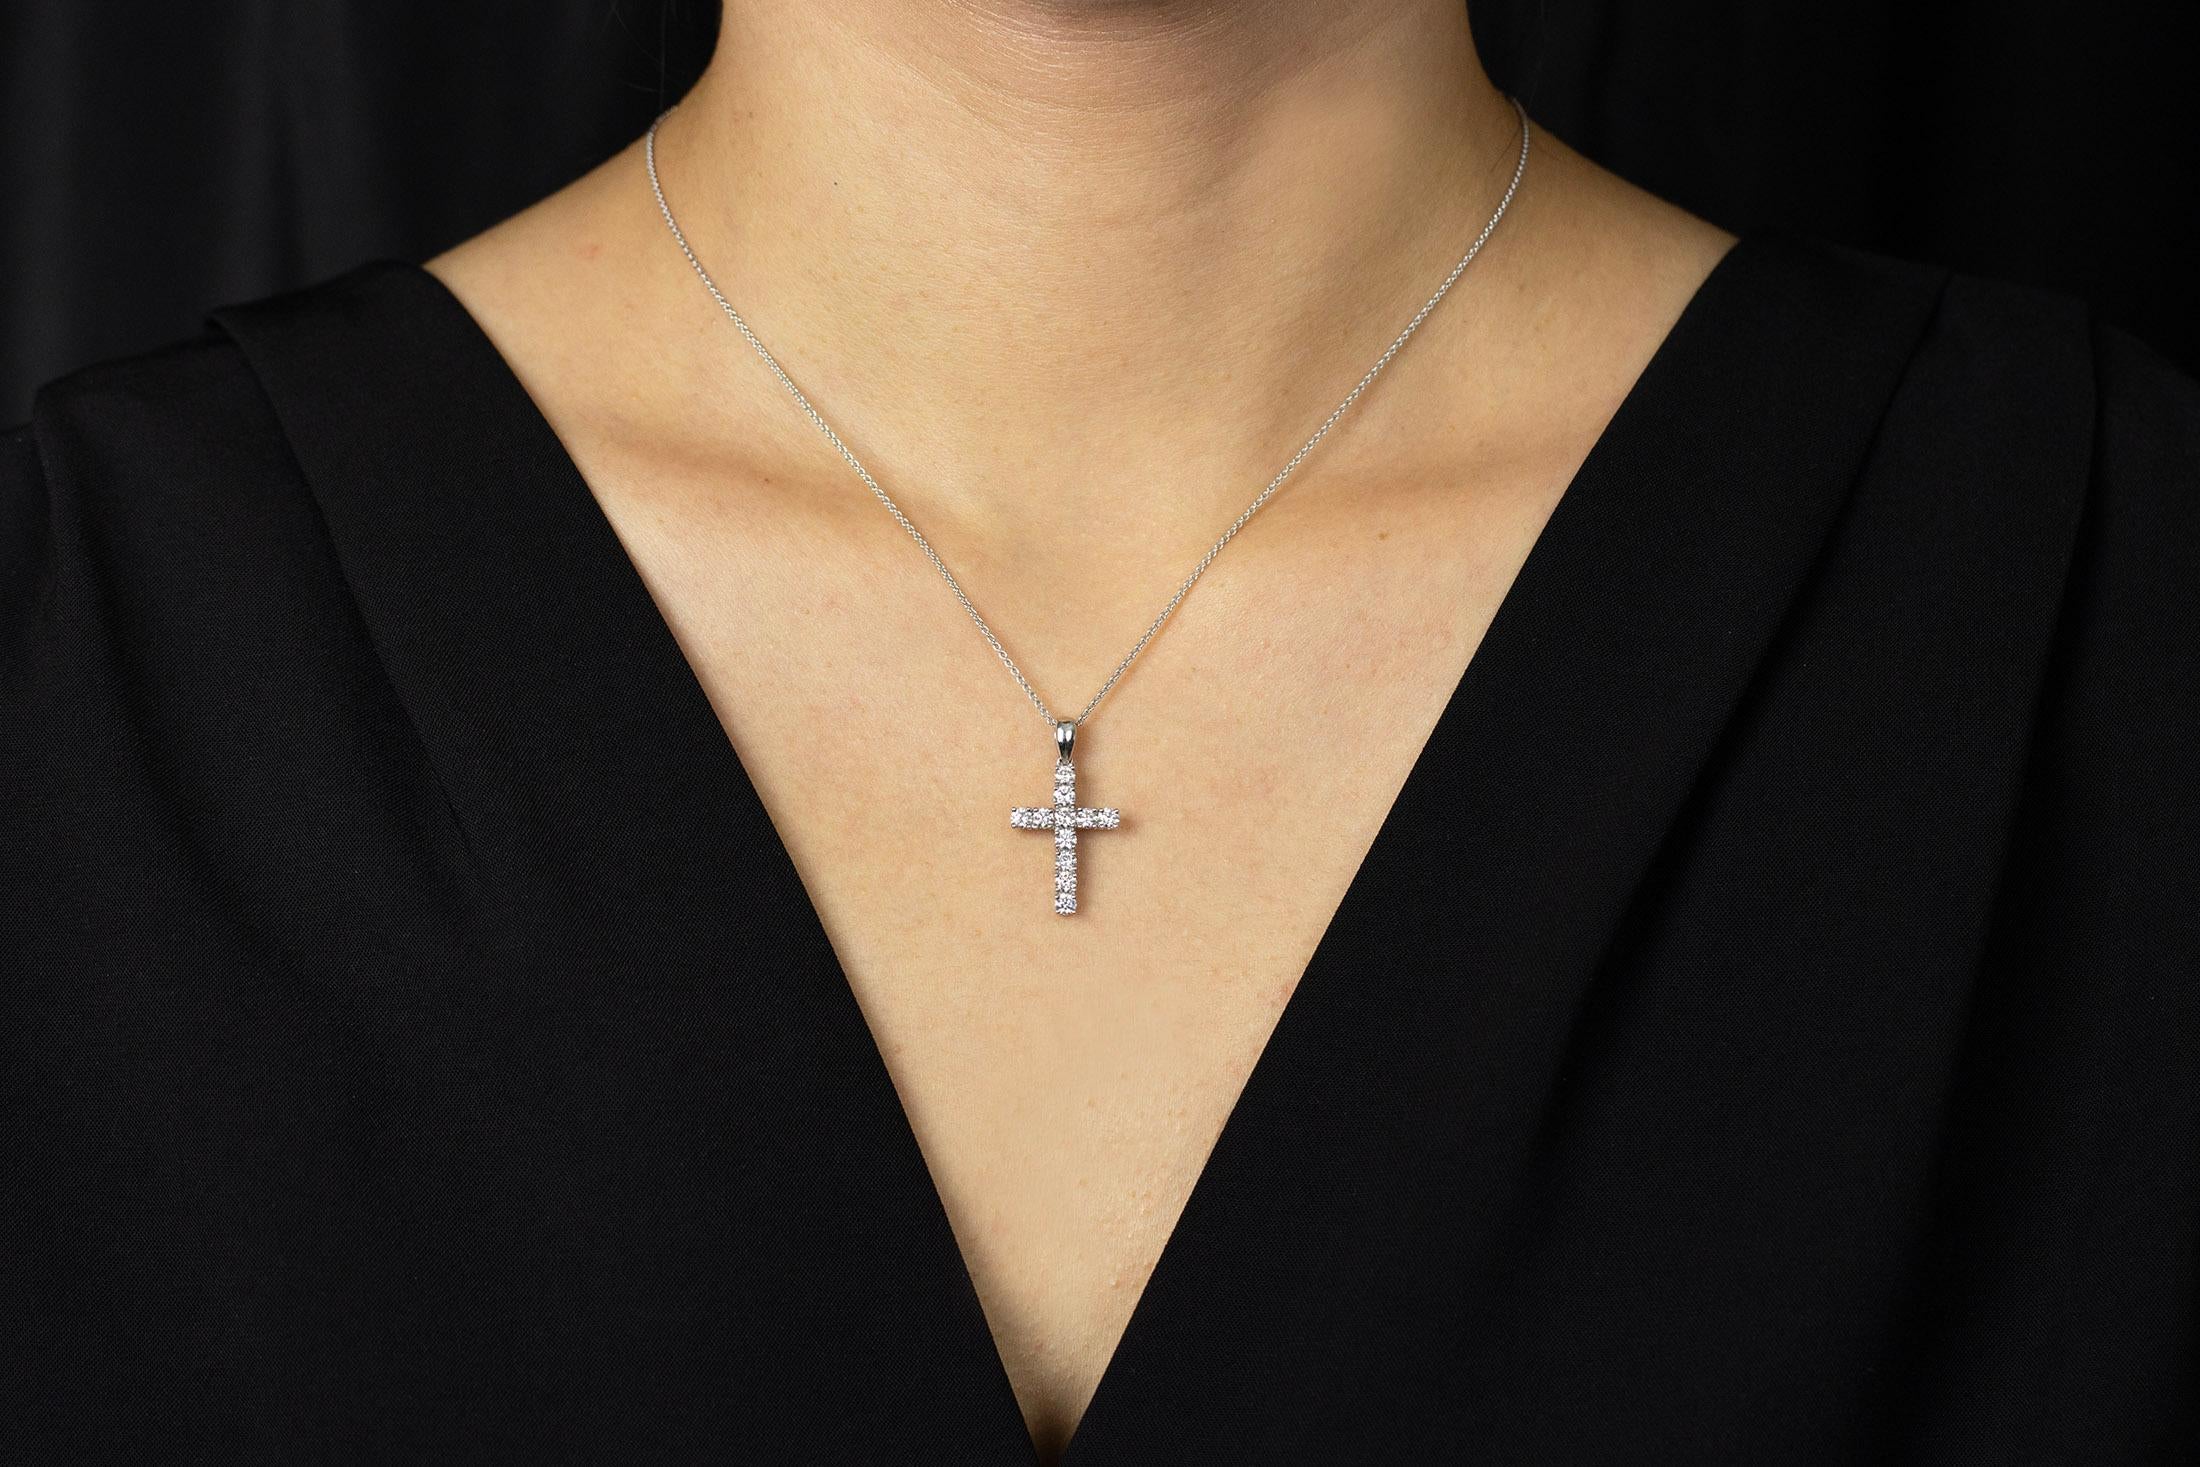 A classic yet endearing cross pendant necklace made in 18k white gold, set with round brilliant diamonds weighing 1.05 carats total. Suspended on an 18 inch adjustable white gold chain.

Style available in different price ranges. Prices are based on